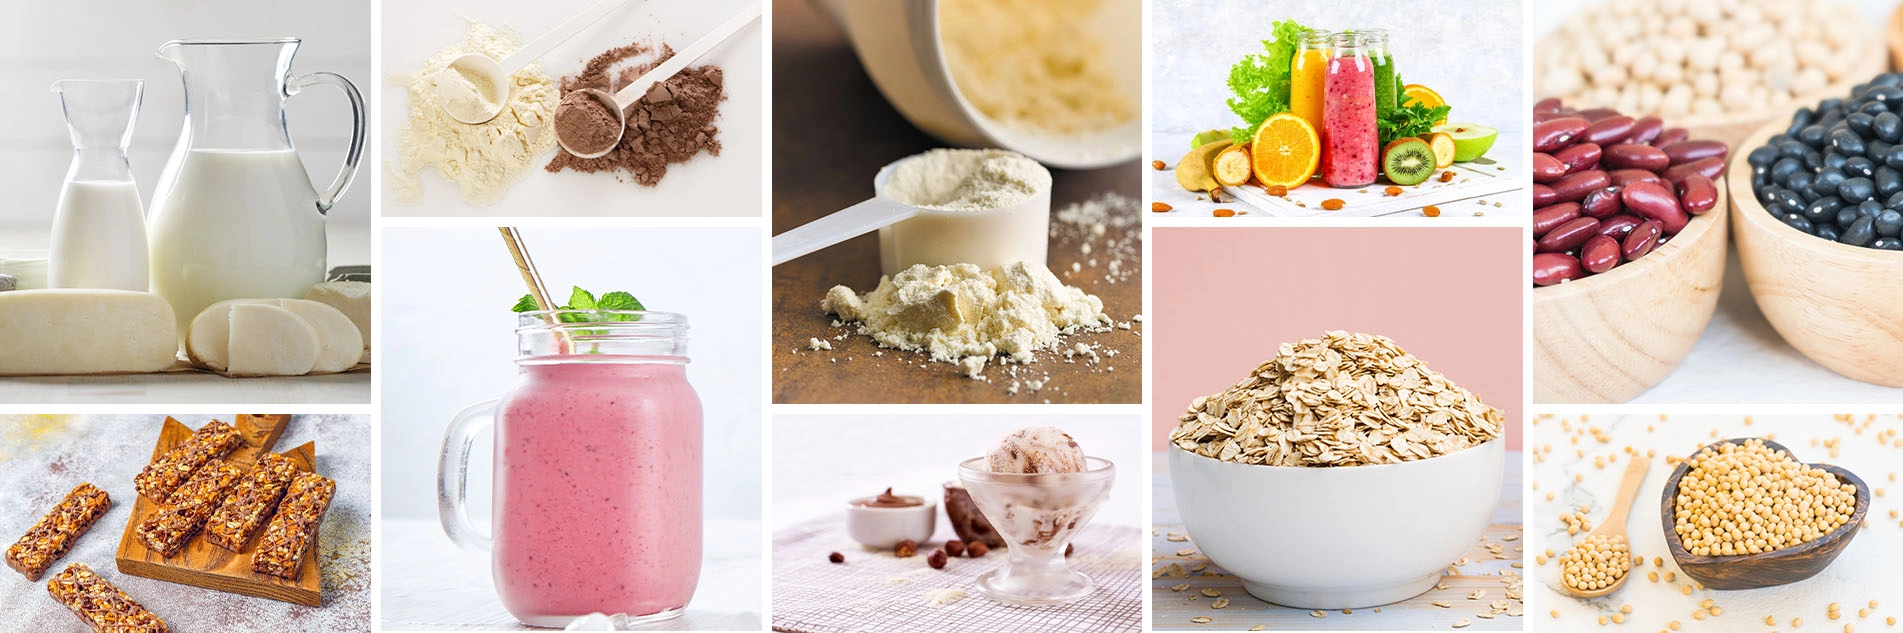 High protein food products and their importance in daily diet